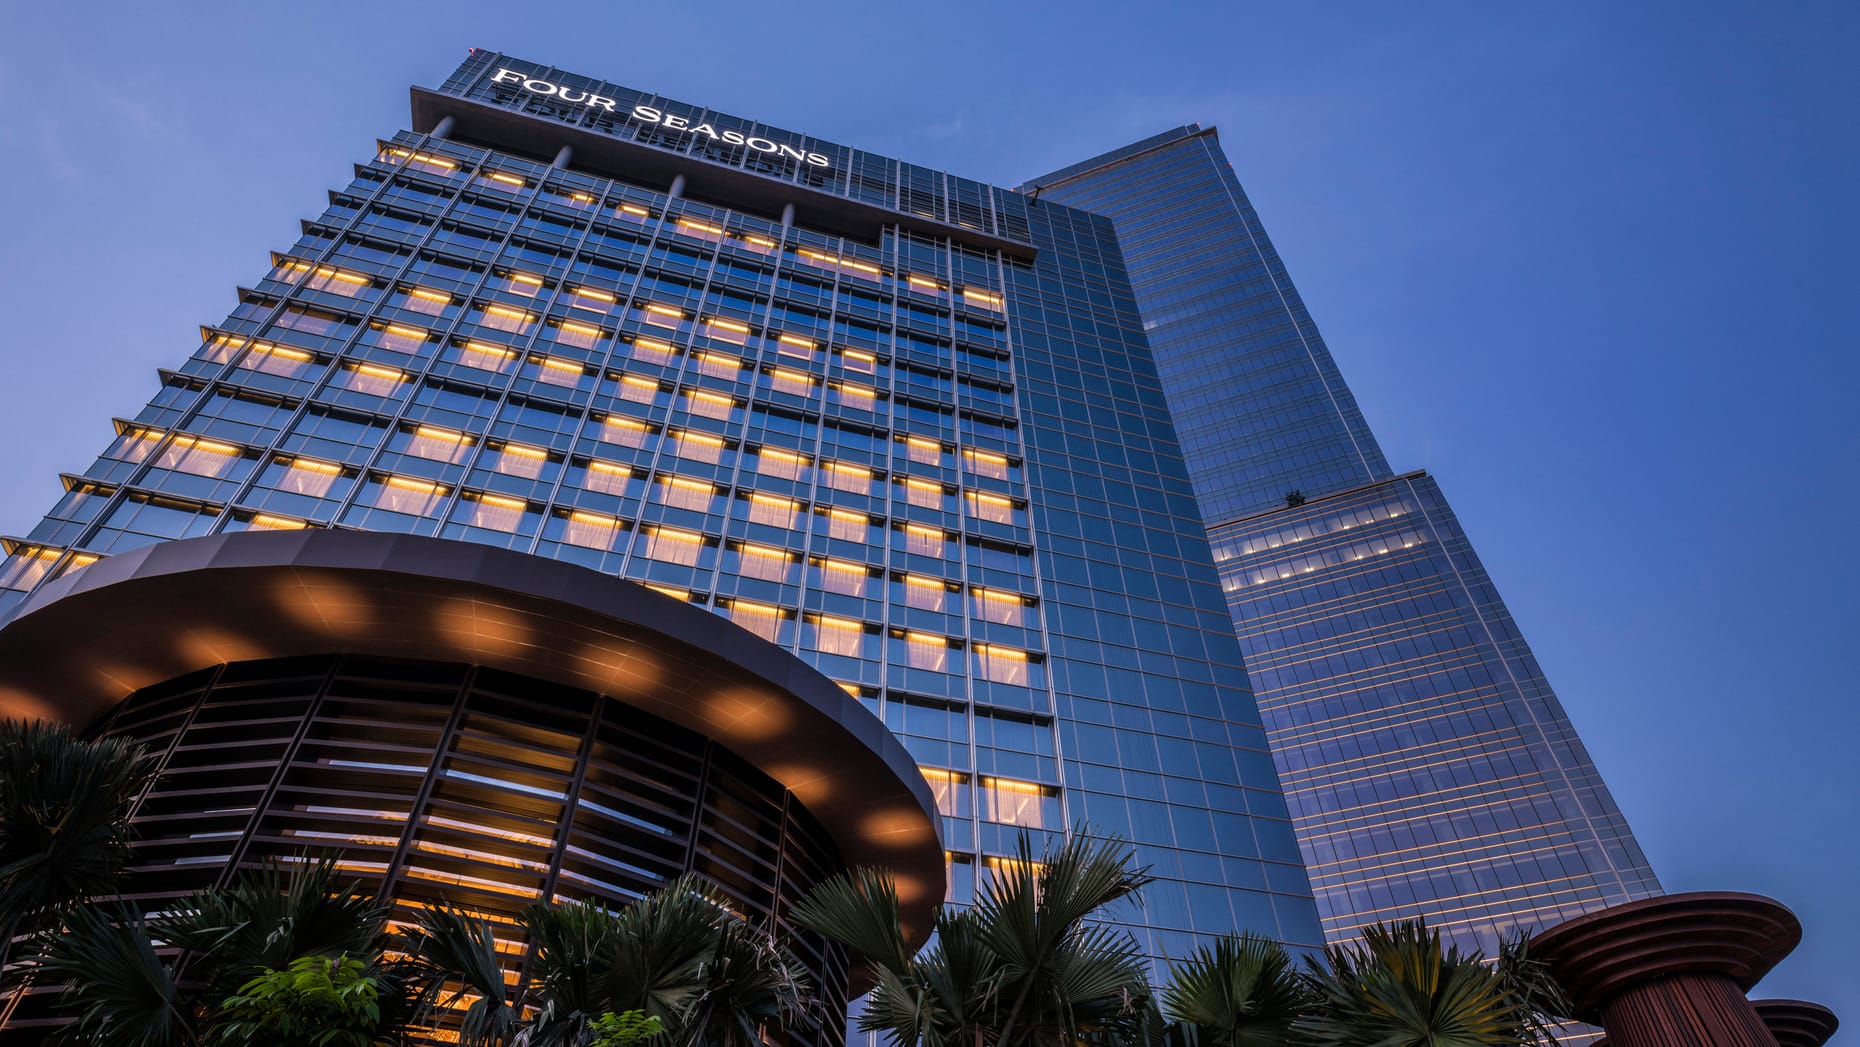 Staying at the Four Seasons Hotel Jakarta, What Are Its Advantages?